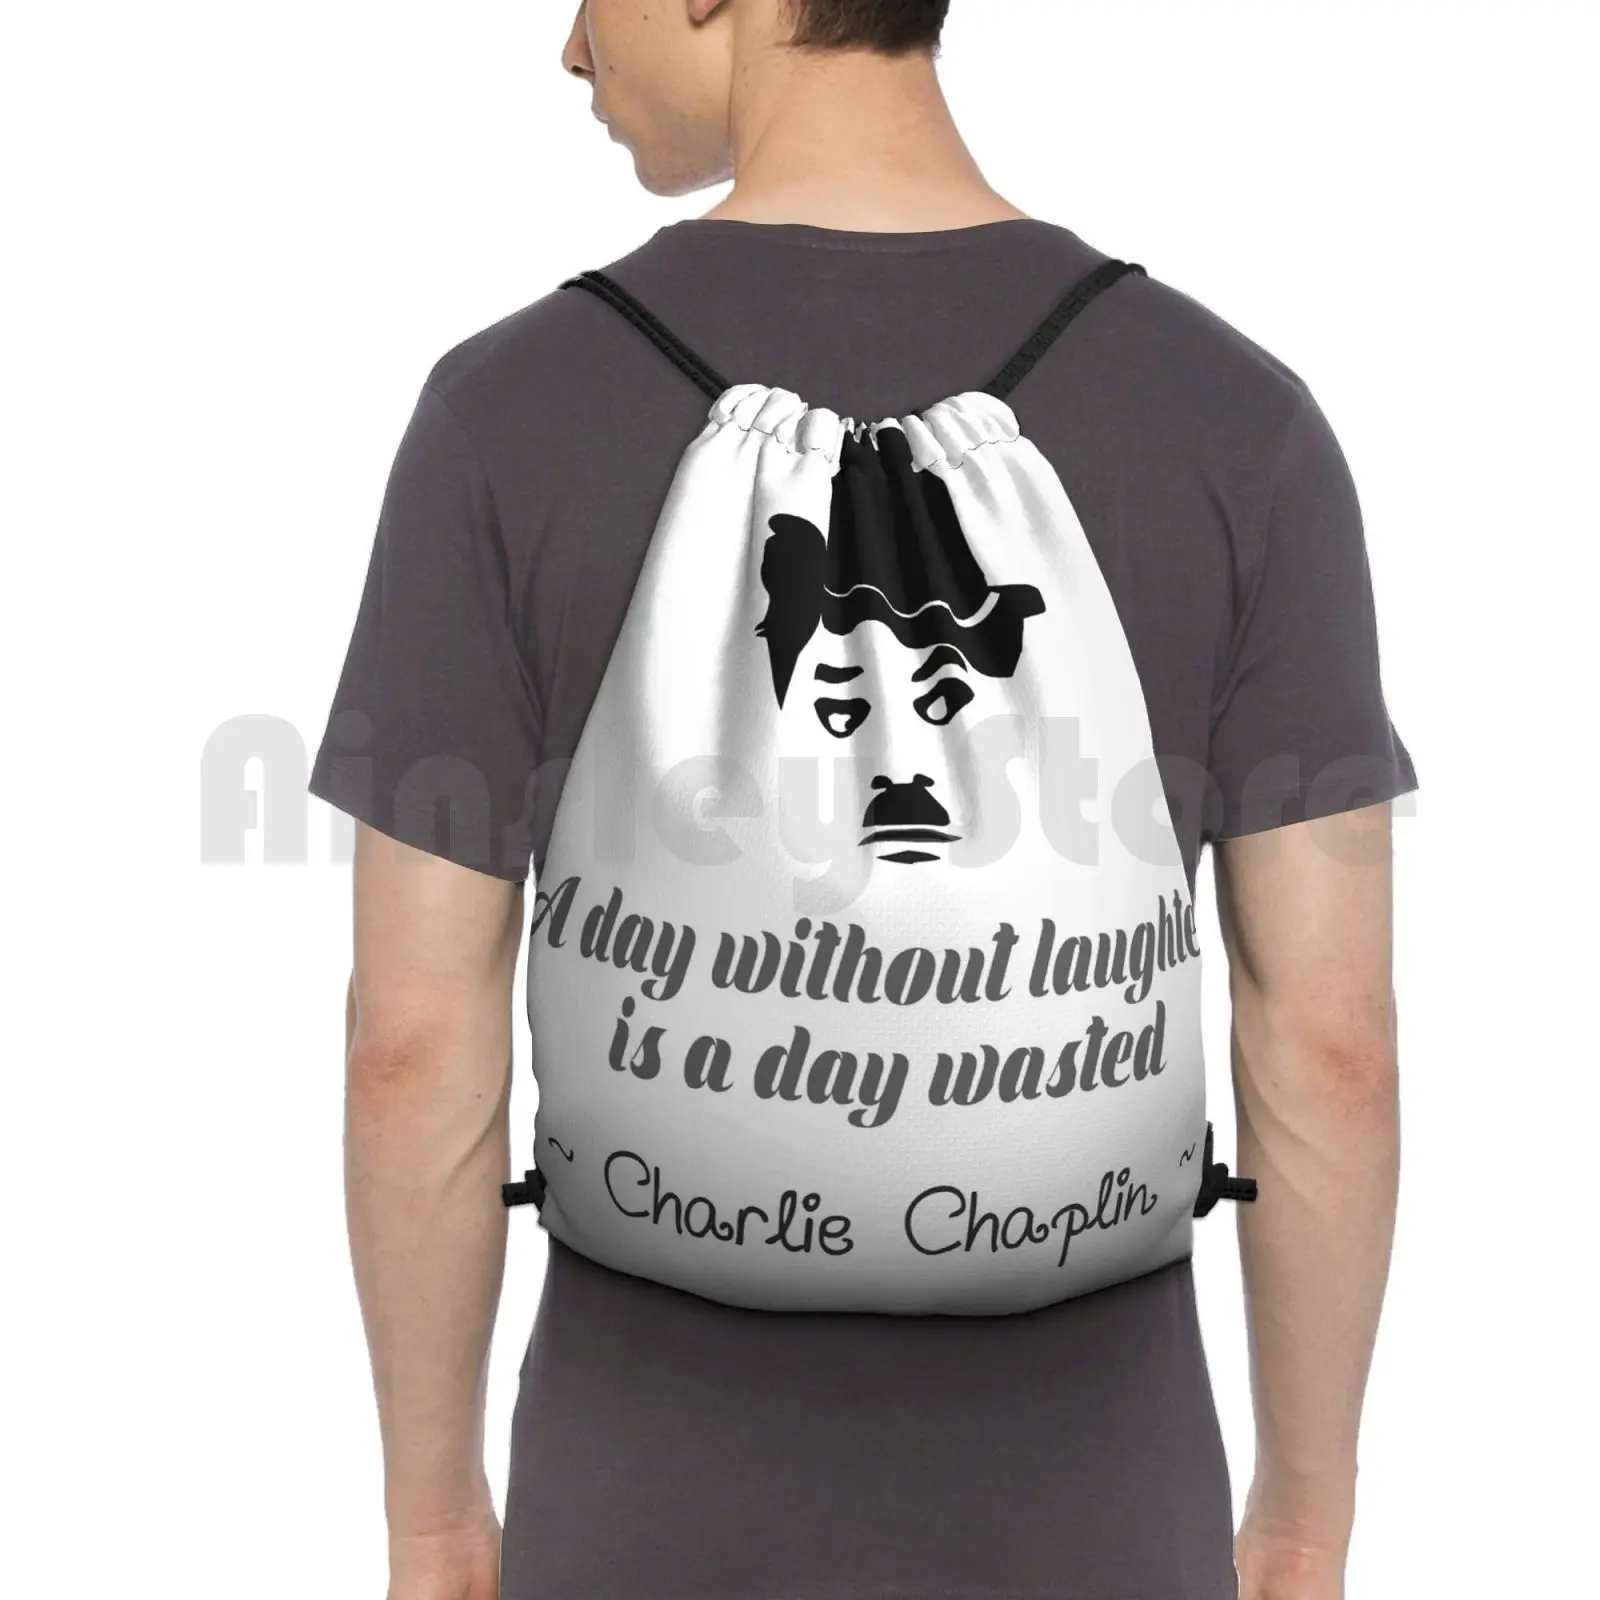 

A Day Without Laughter Backpack Drawstring Bag Riding Climbing Gym Bag Chaplin Actor Silent Movies Quotes Comedy Comedian